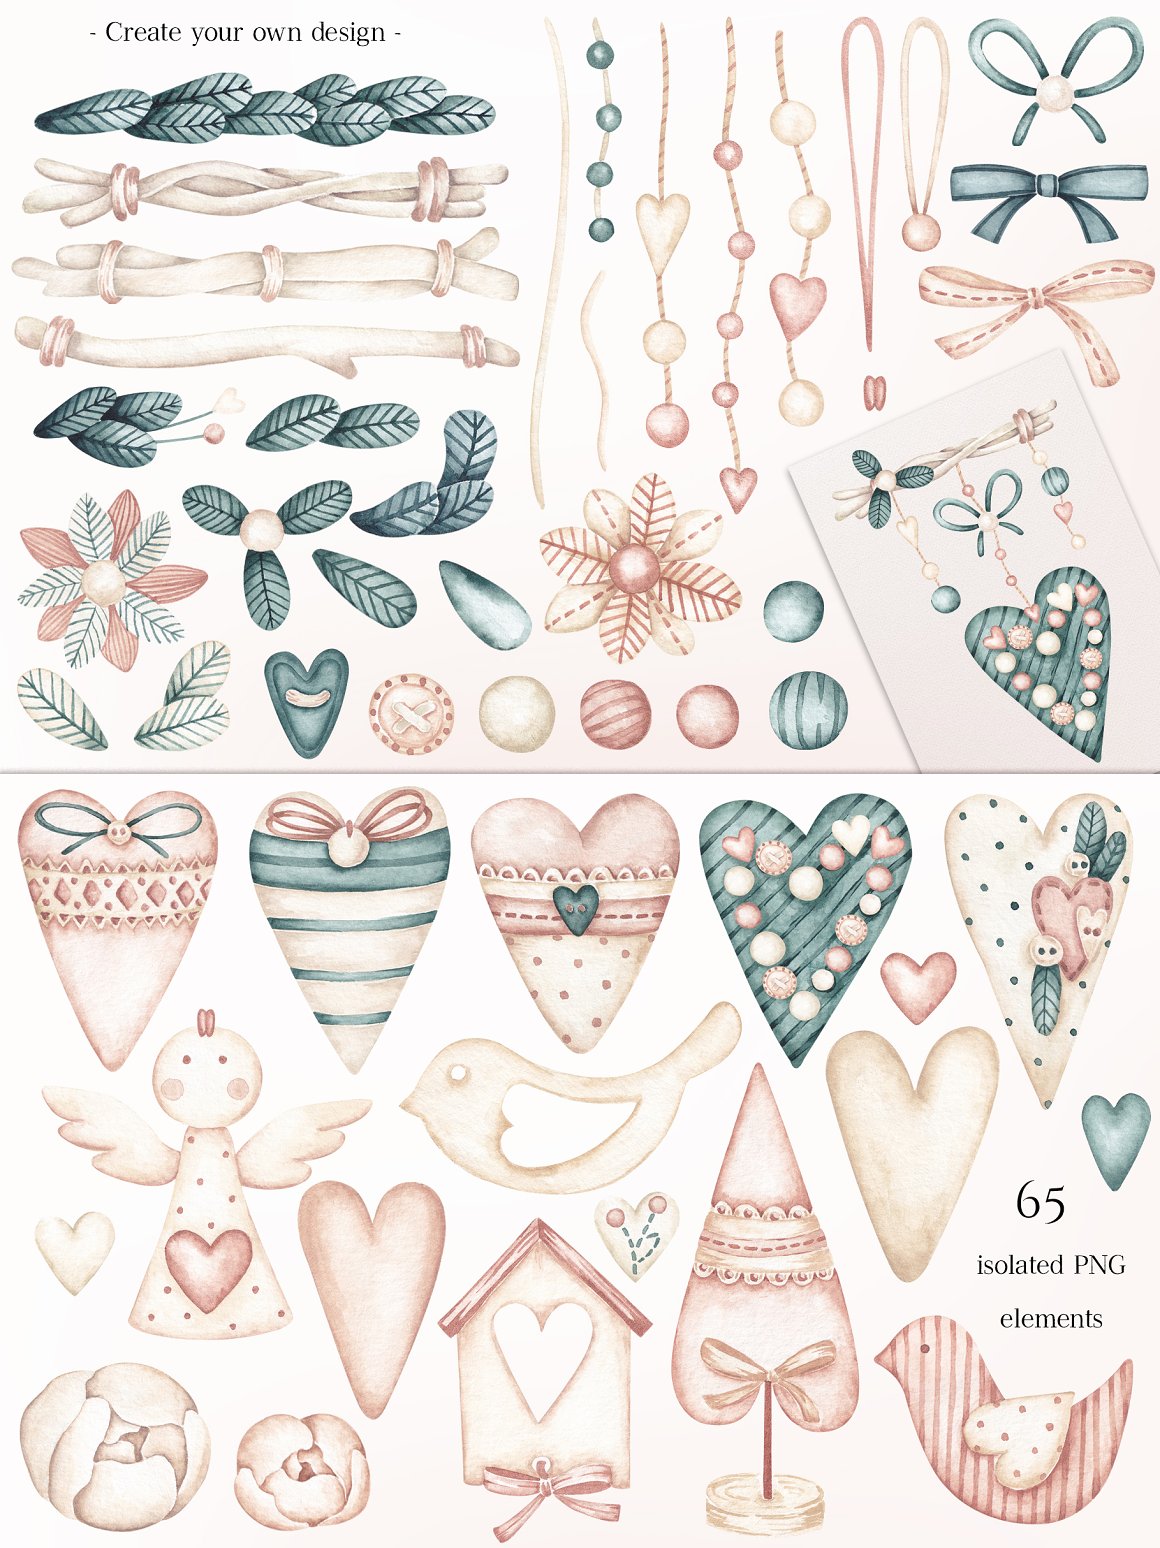 A set of 65 different pink and blue watercolor valentine's elements.